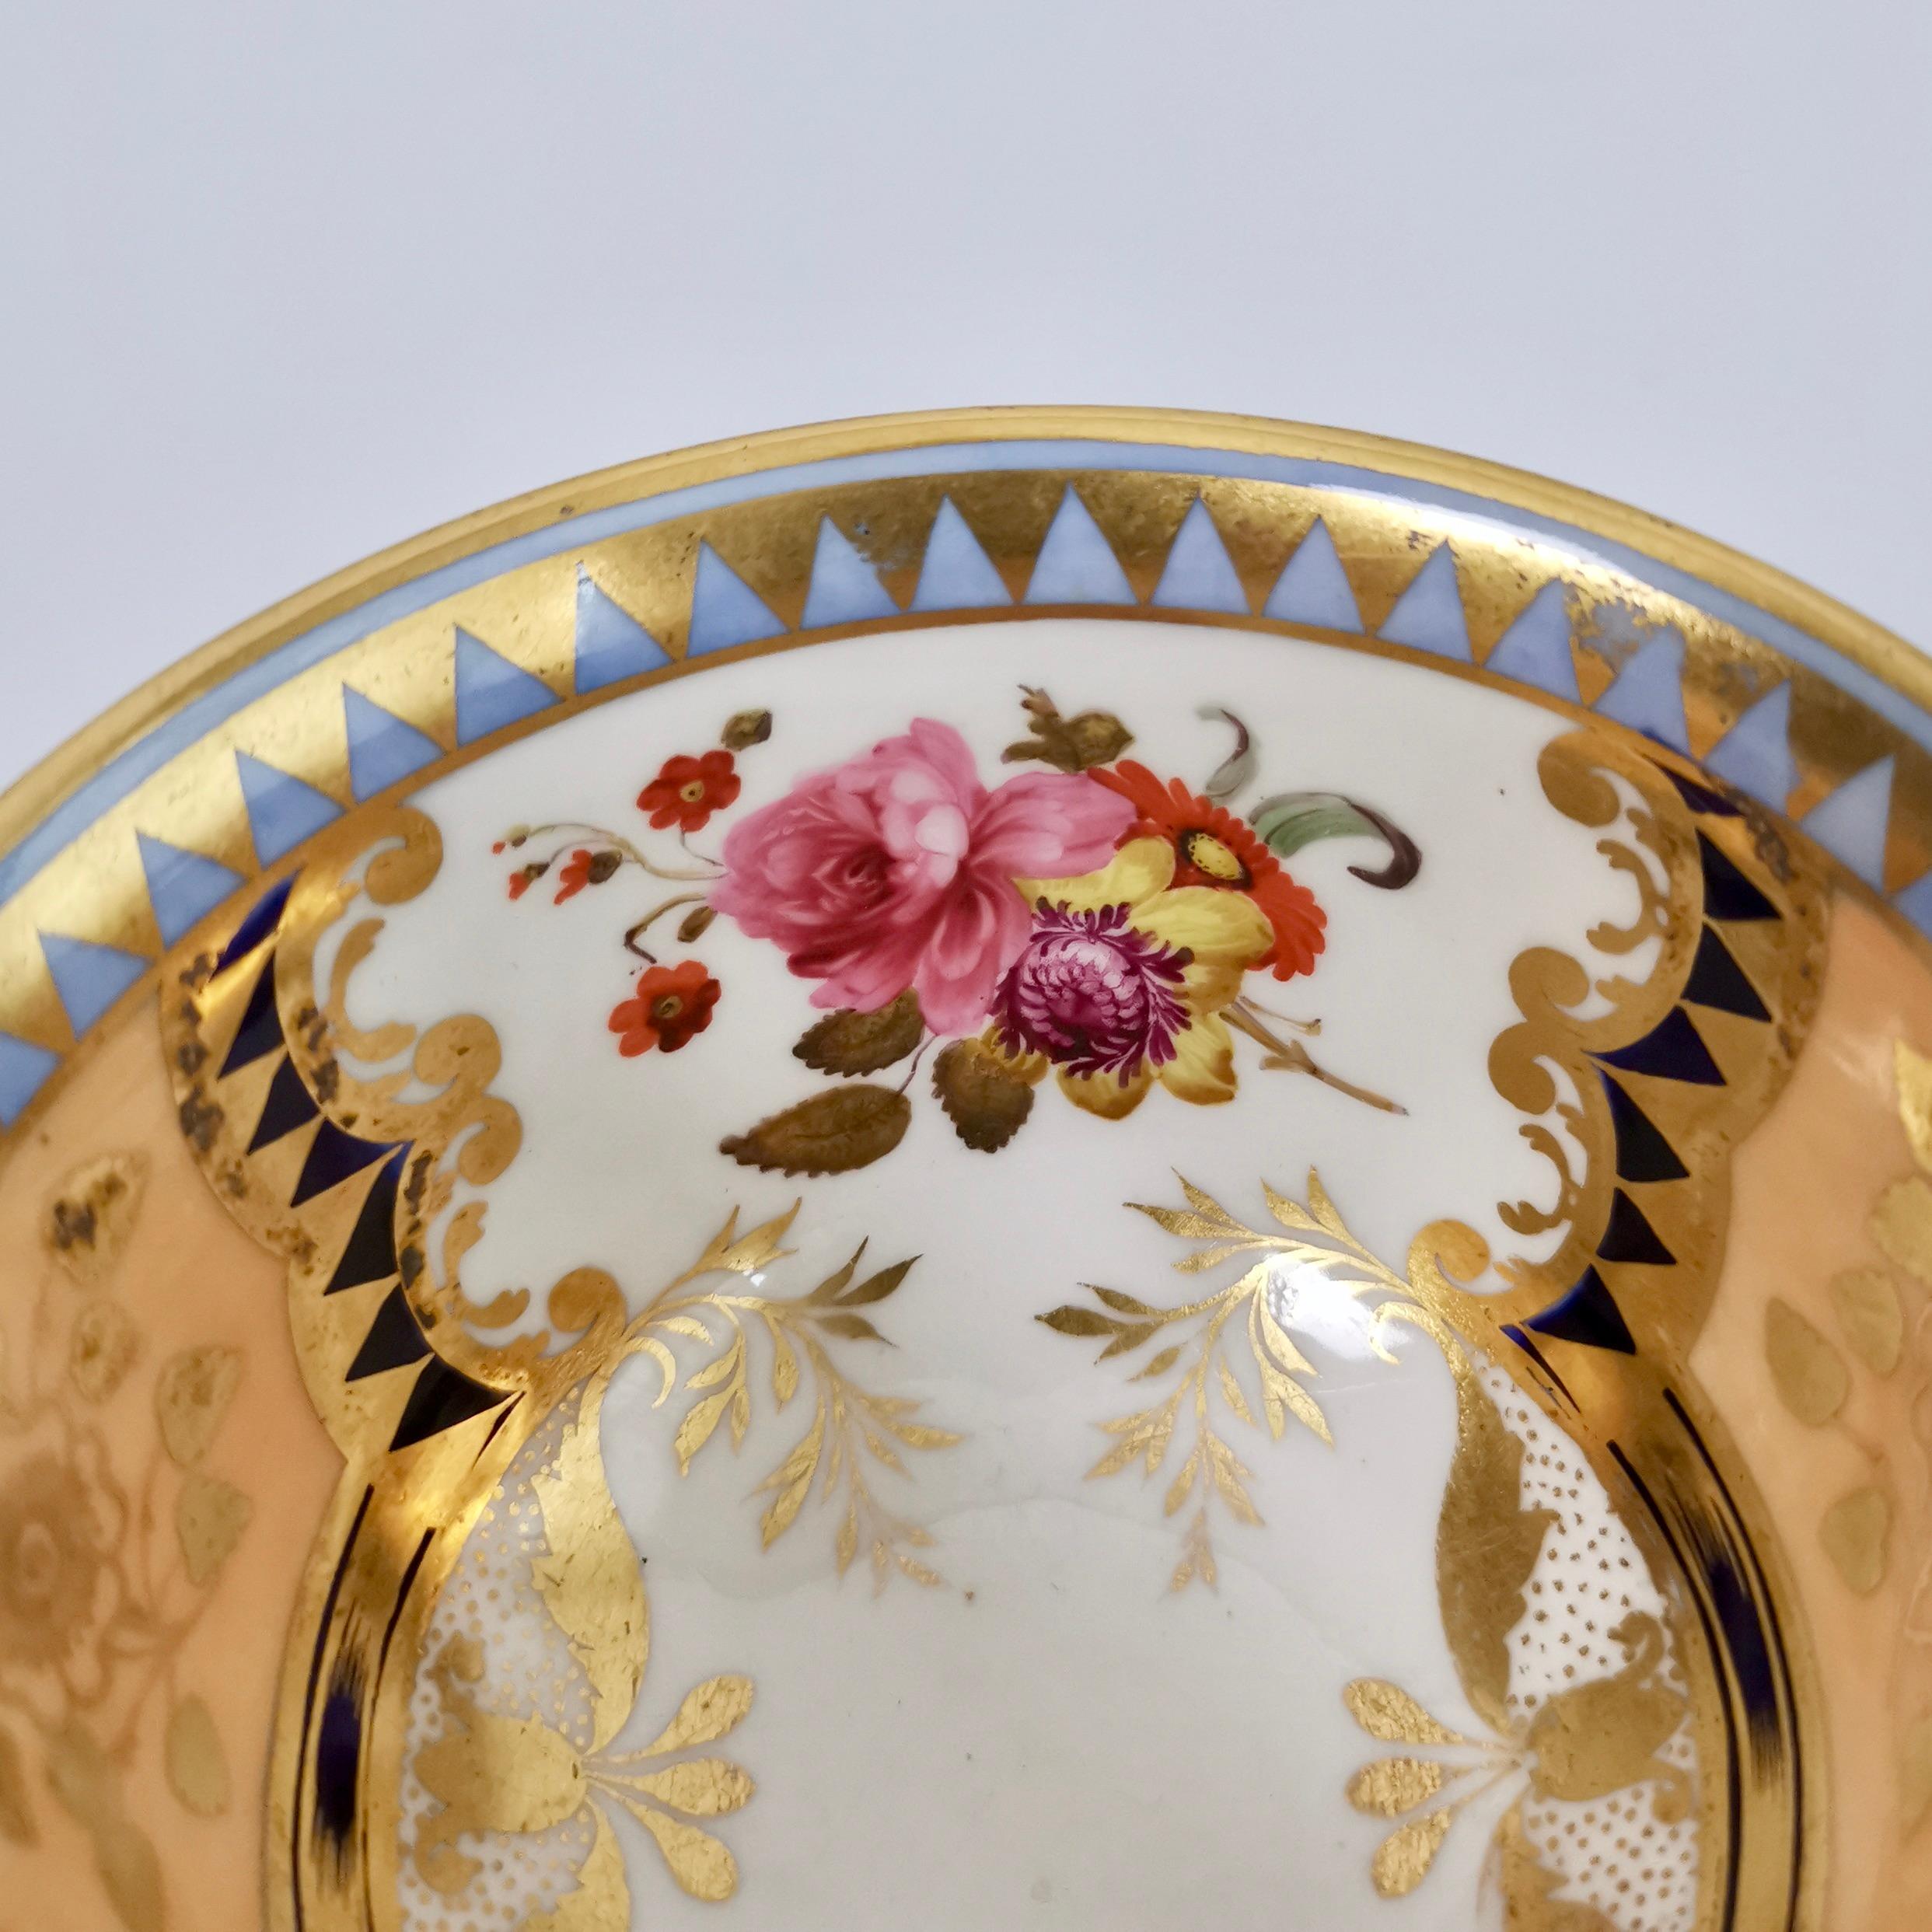 Ridgway Porcelain Teacup, Apricot, Periwinkle and Flowers, Regency circa 1820 4